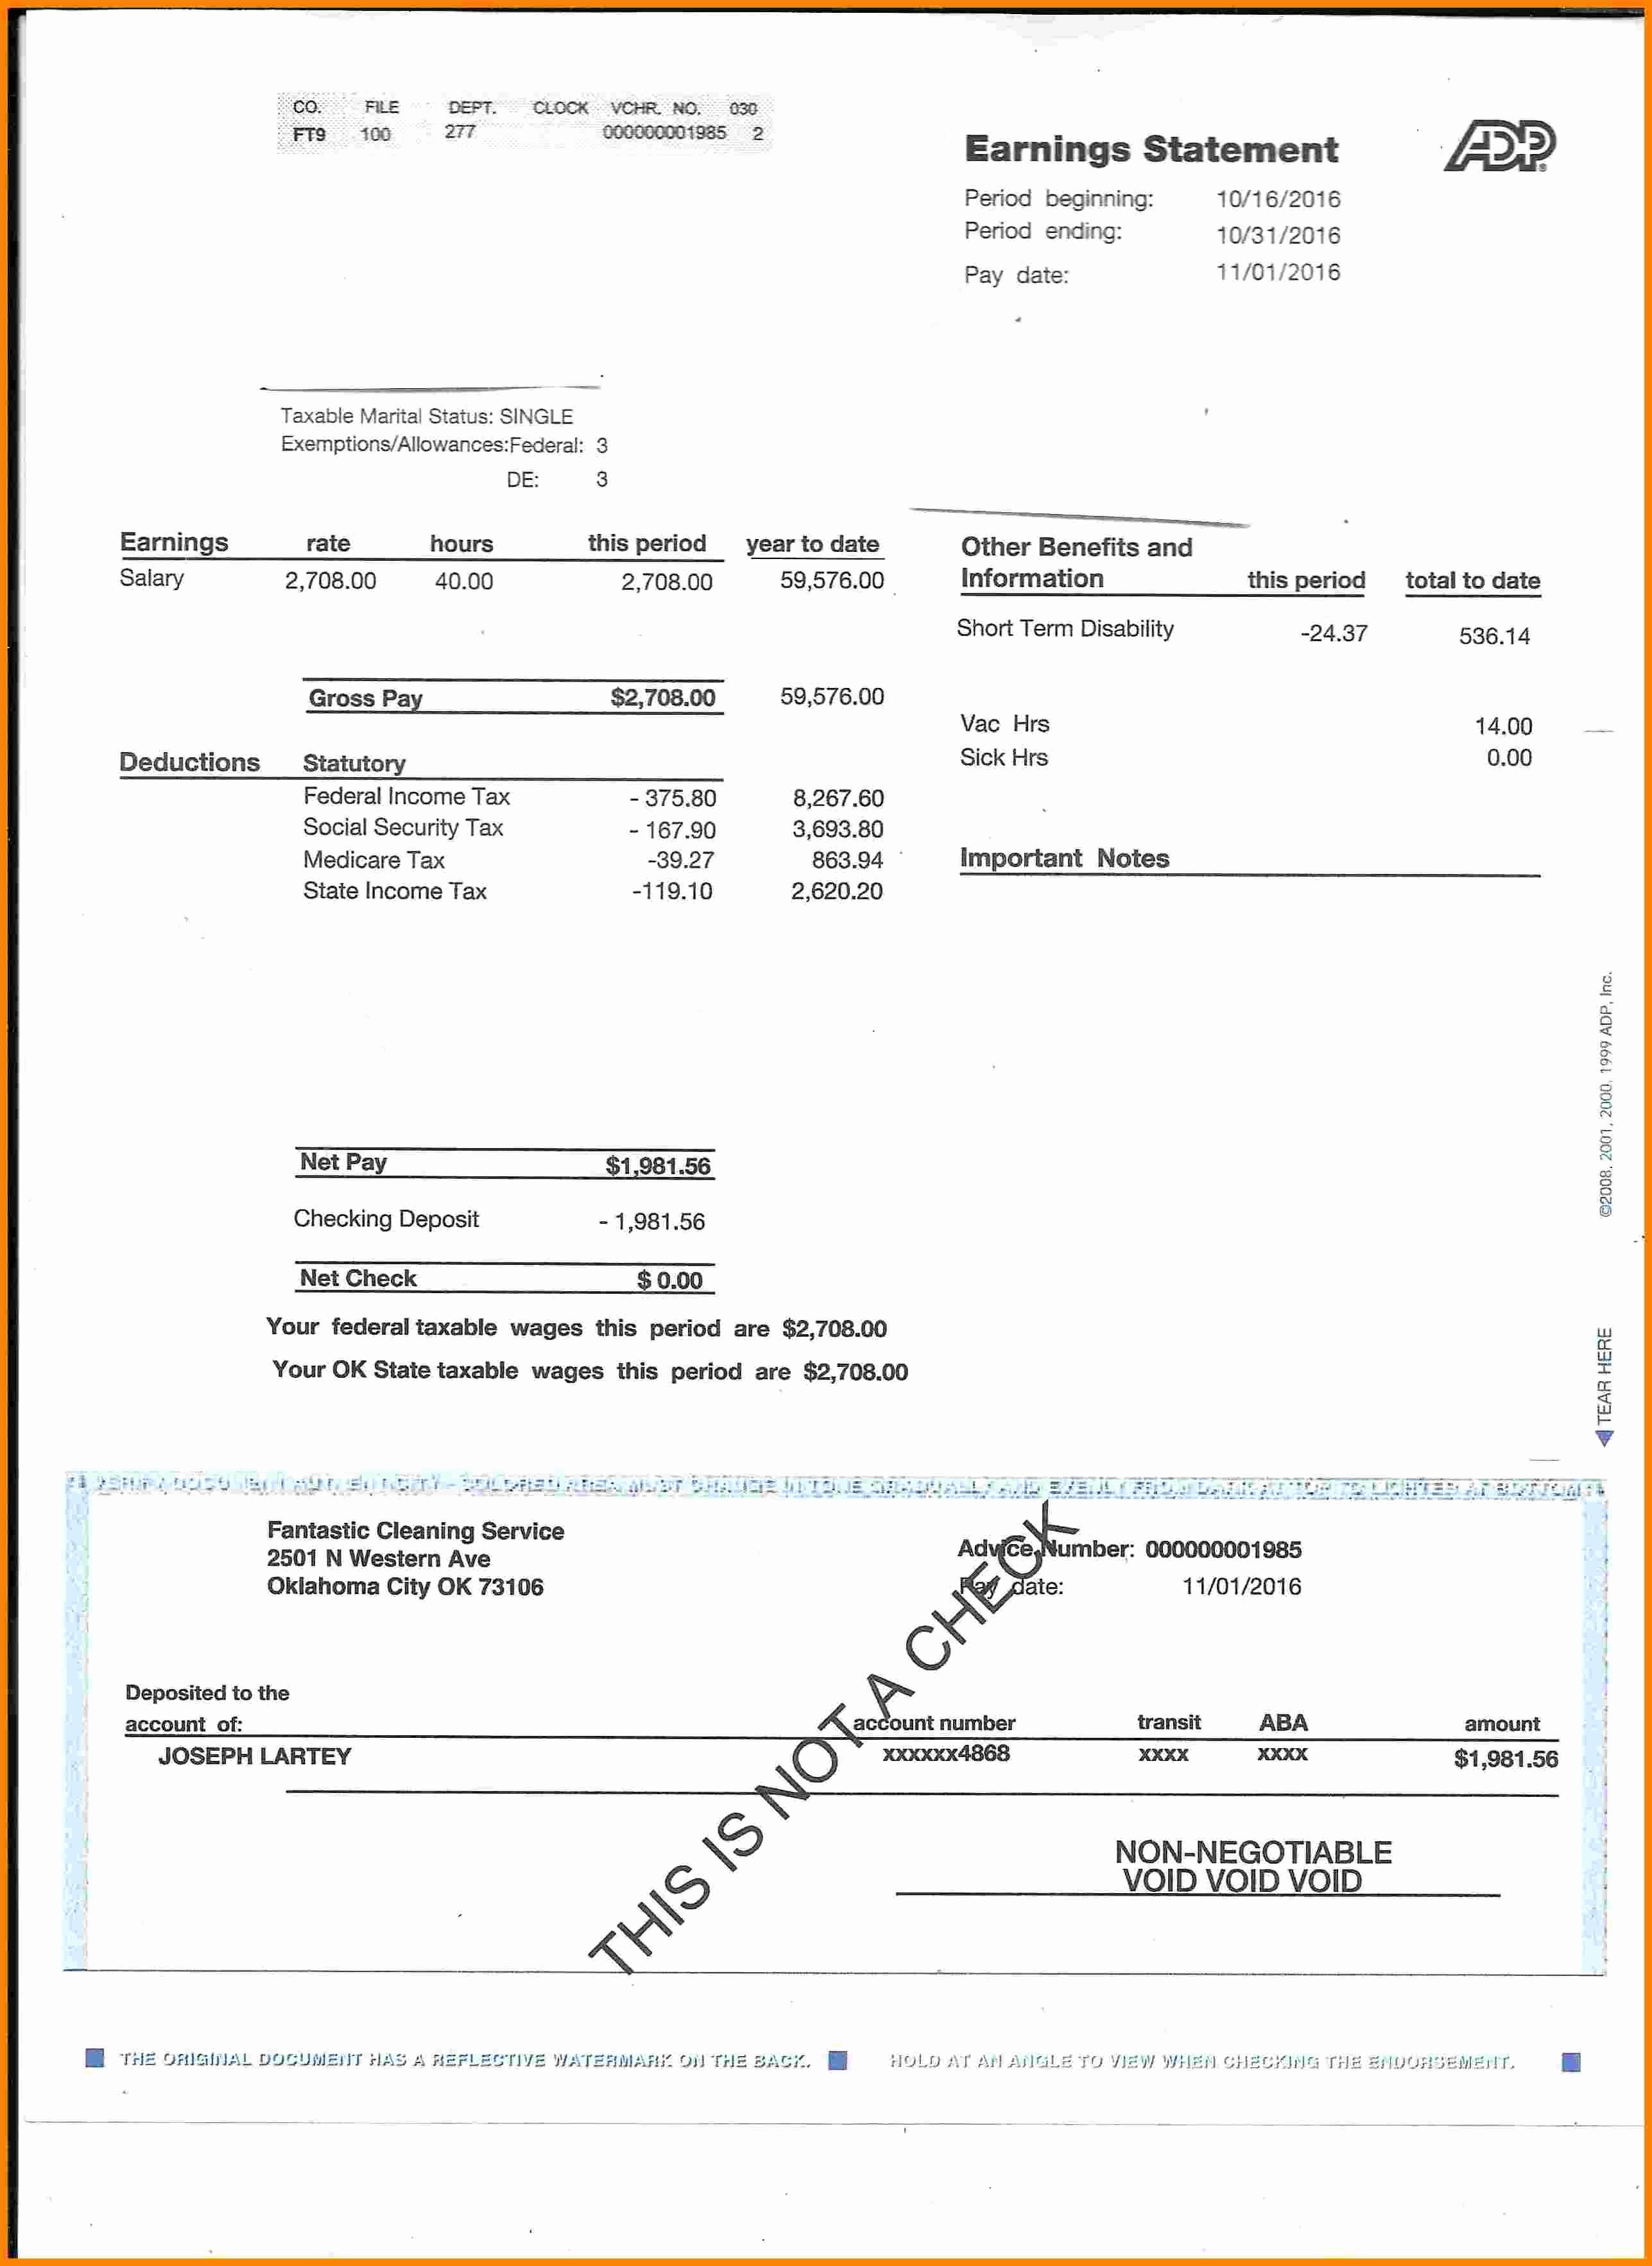 Adp Earnings Statement Template Lovely Adp Pay Statement as Well Statements Canada with Do Not